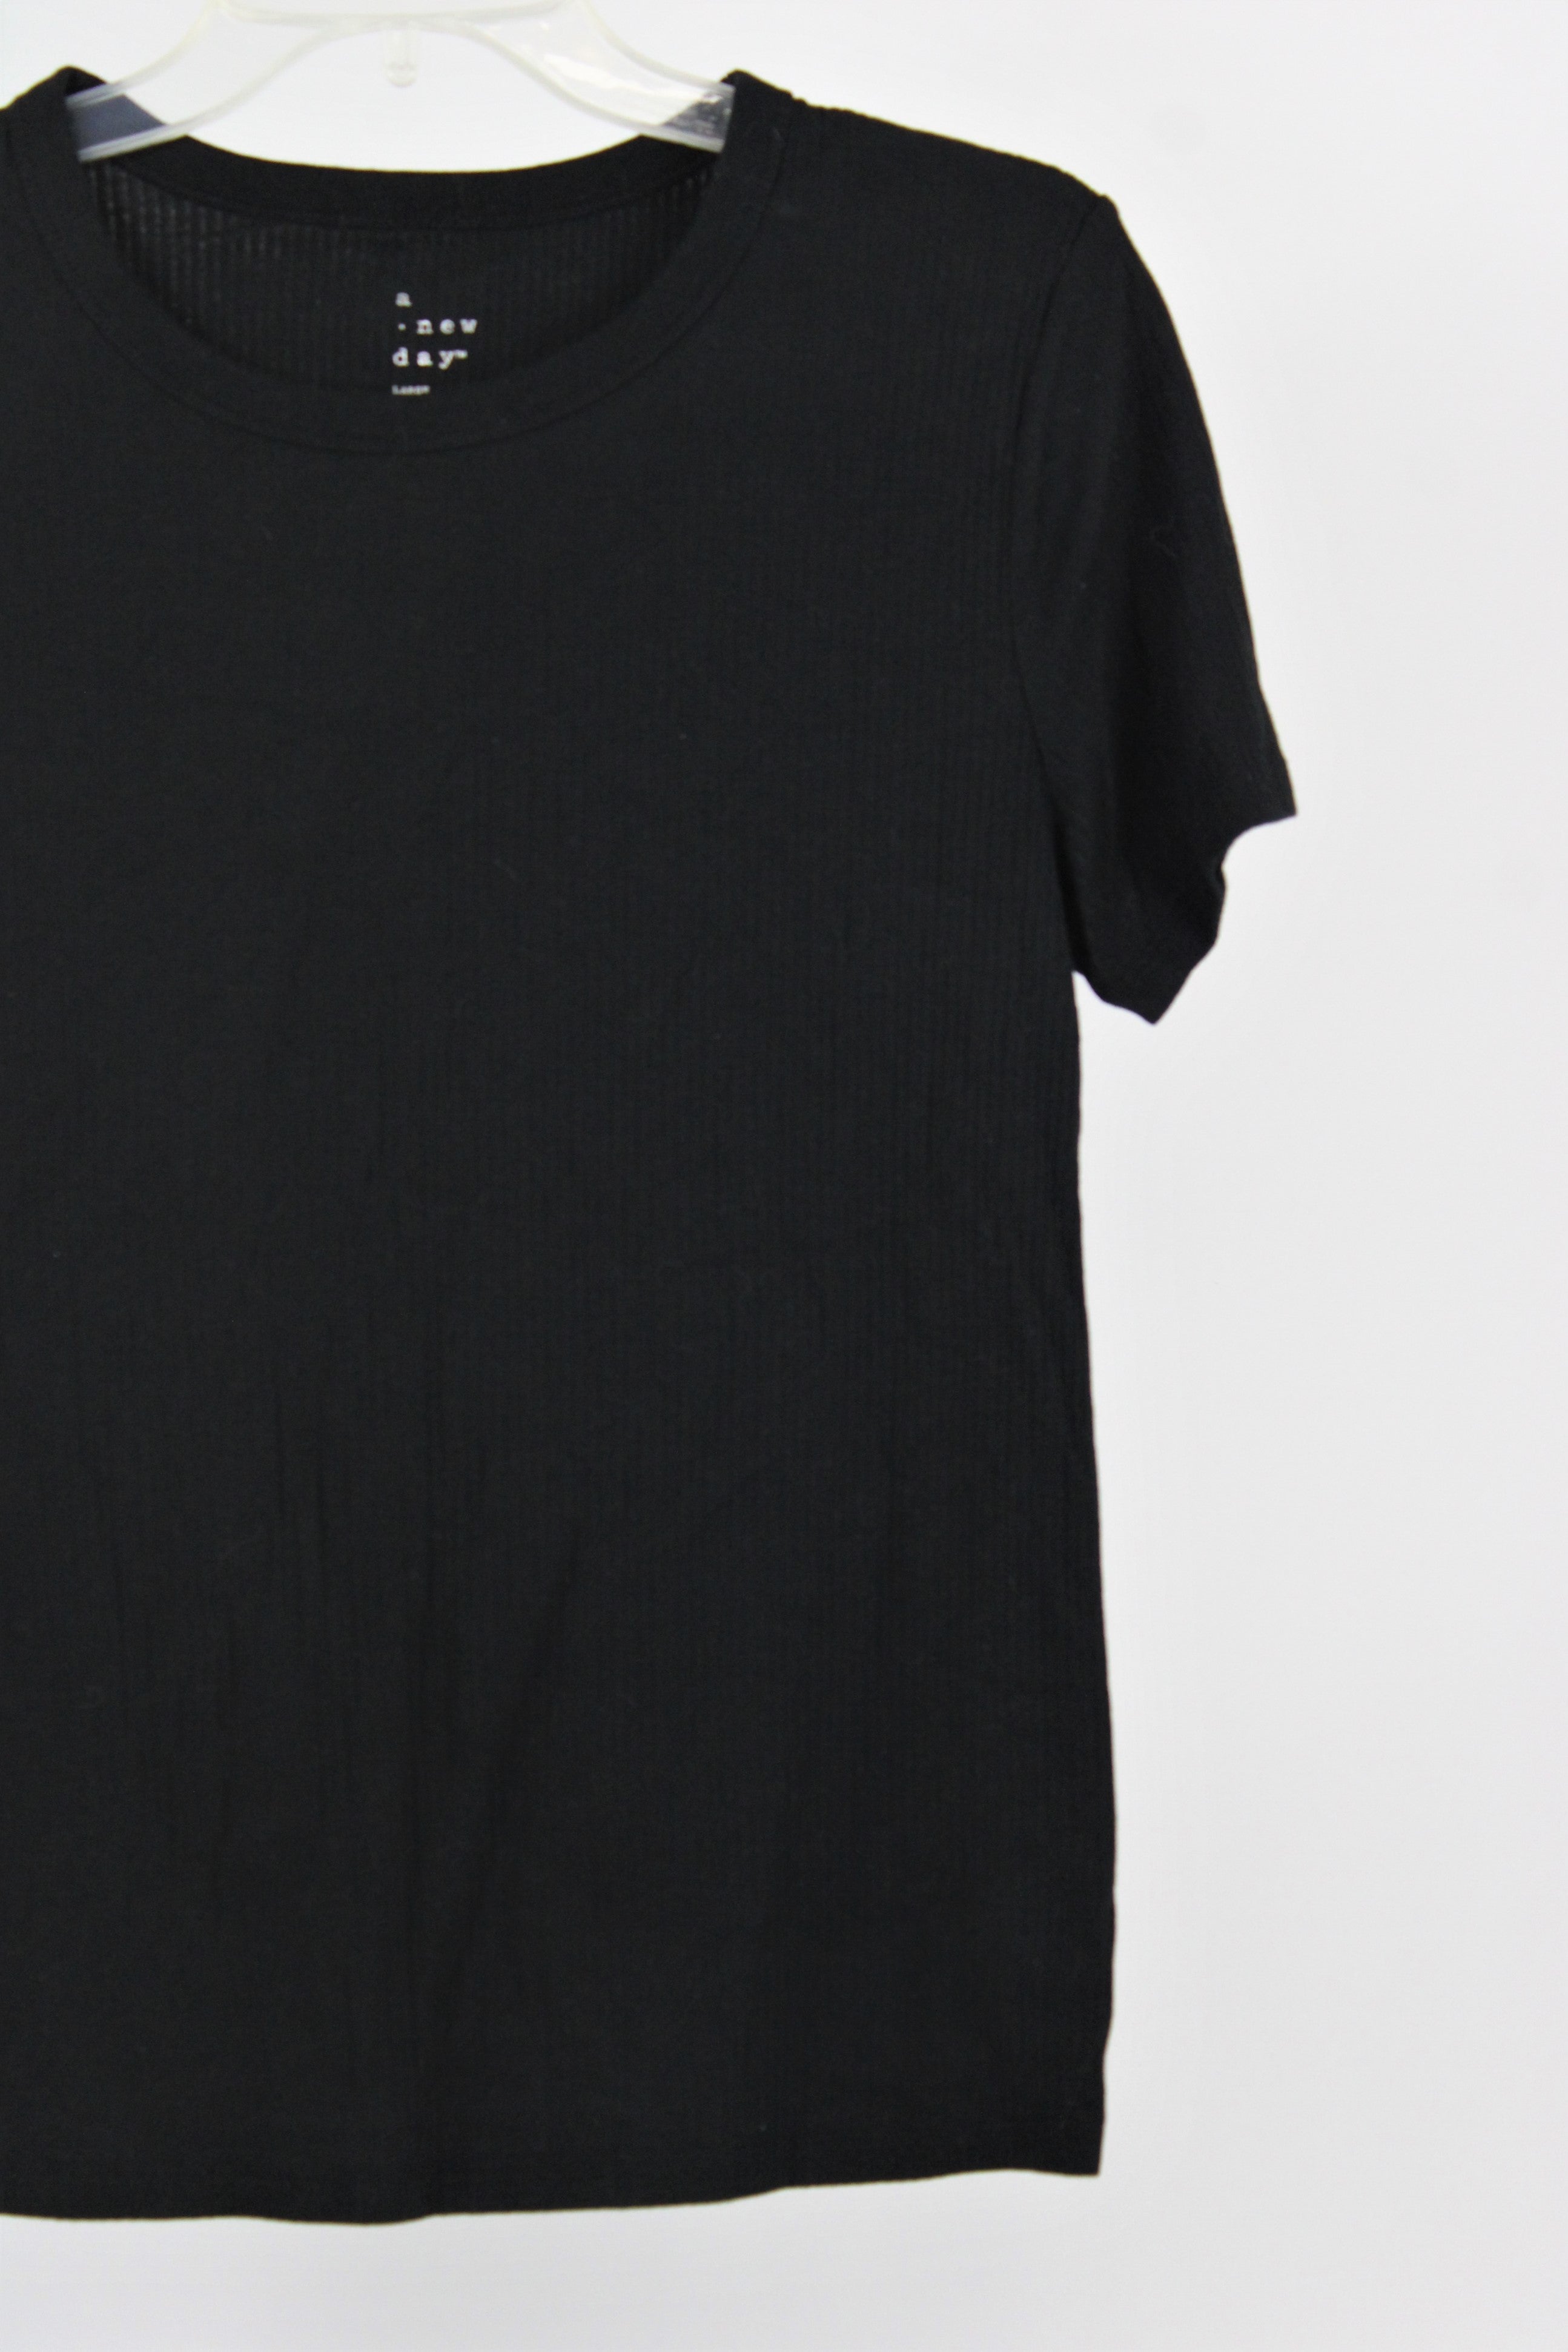 A New Day Black Ribbed Tee | L